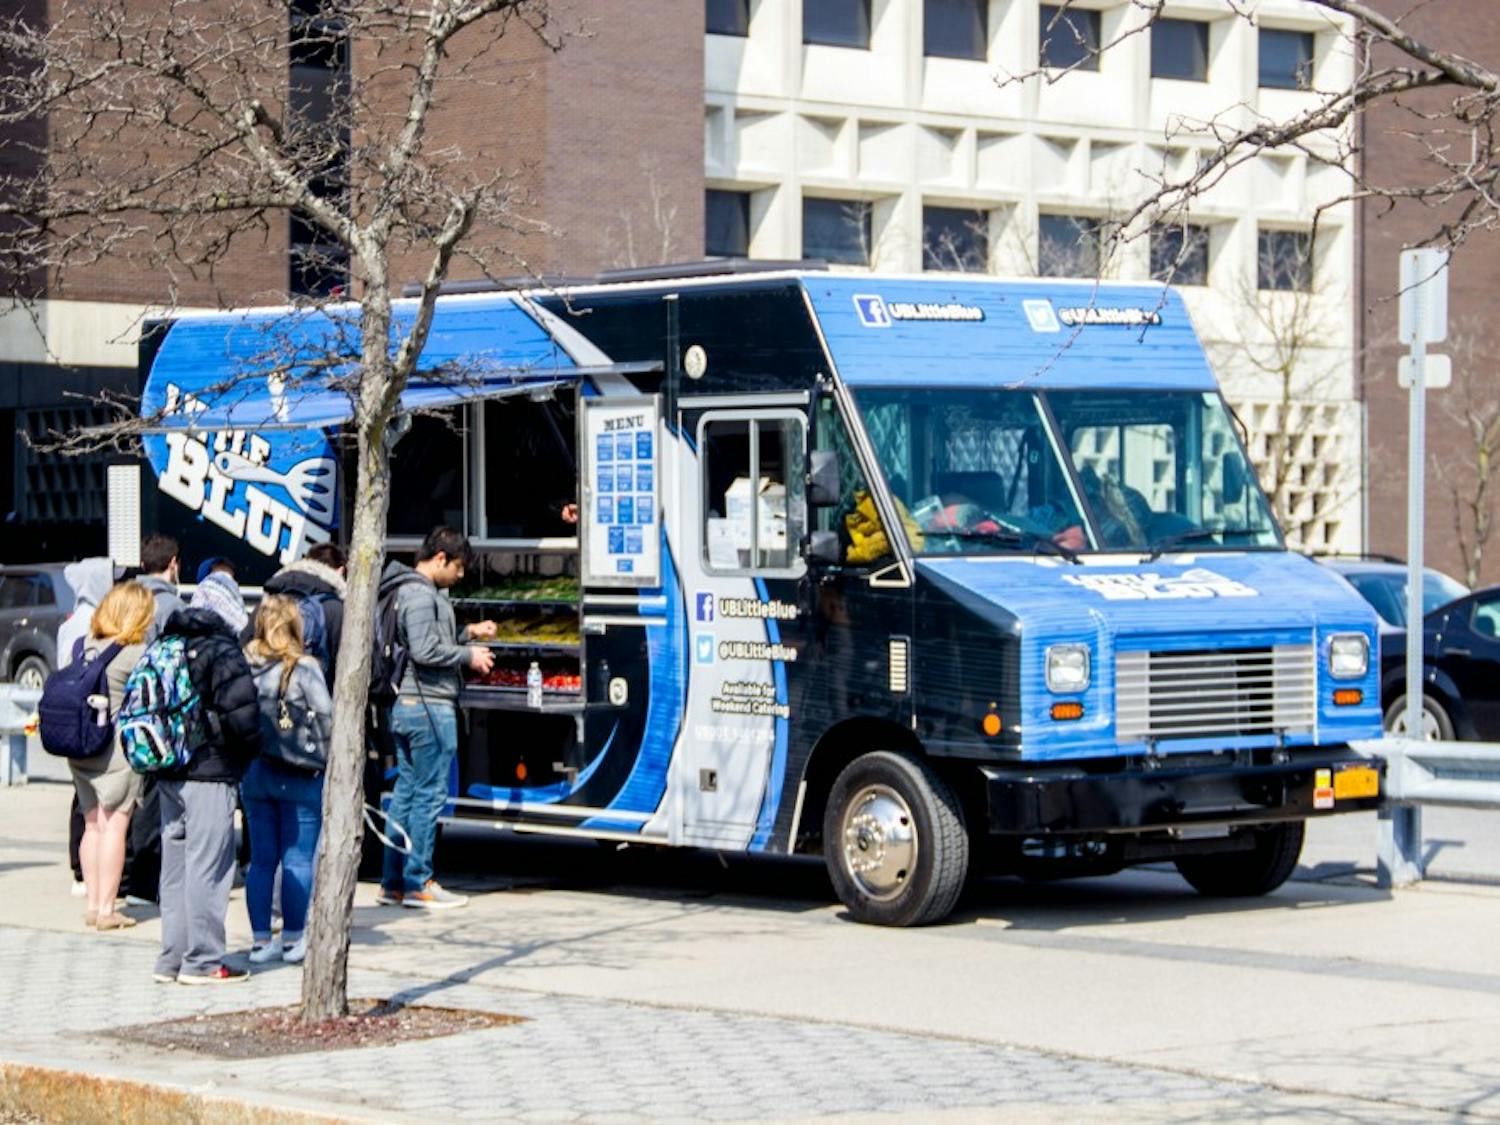 Students standing in front of “Big Blue” food truck to order their lunch. The “Big Blue” and “Little Blue” food trucks are owned by the Faculty-Student Association and are the only trucks allowed to serve on UB’s campus.